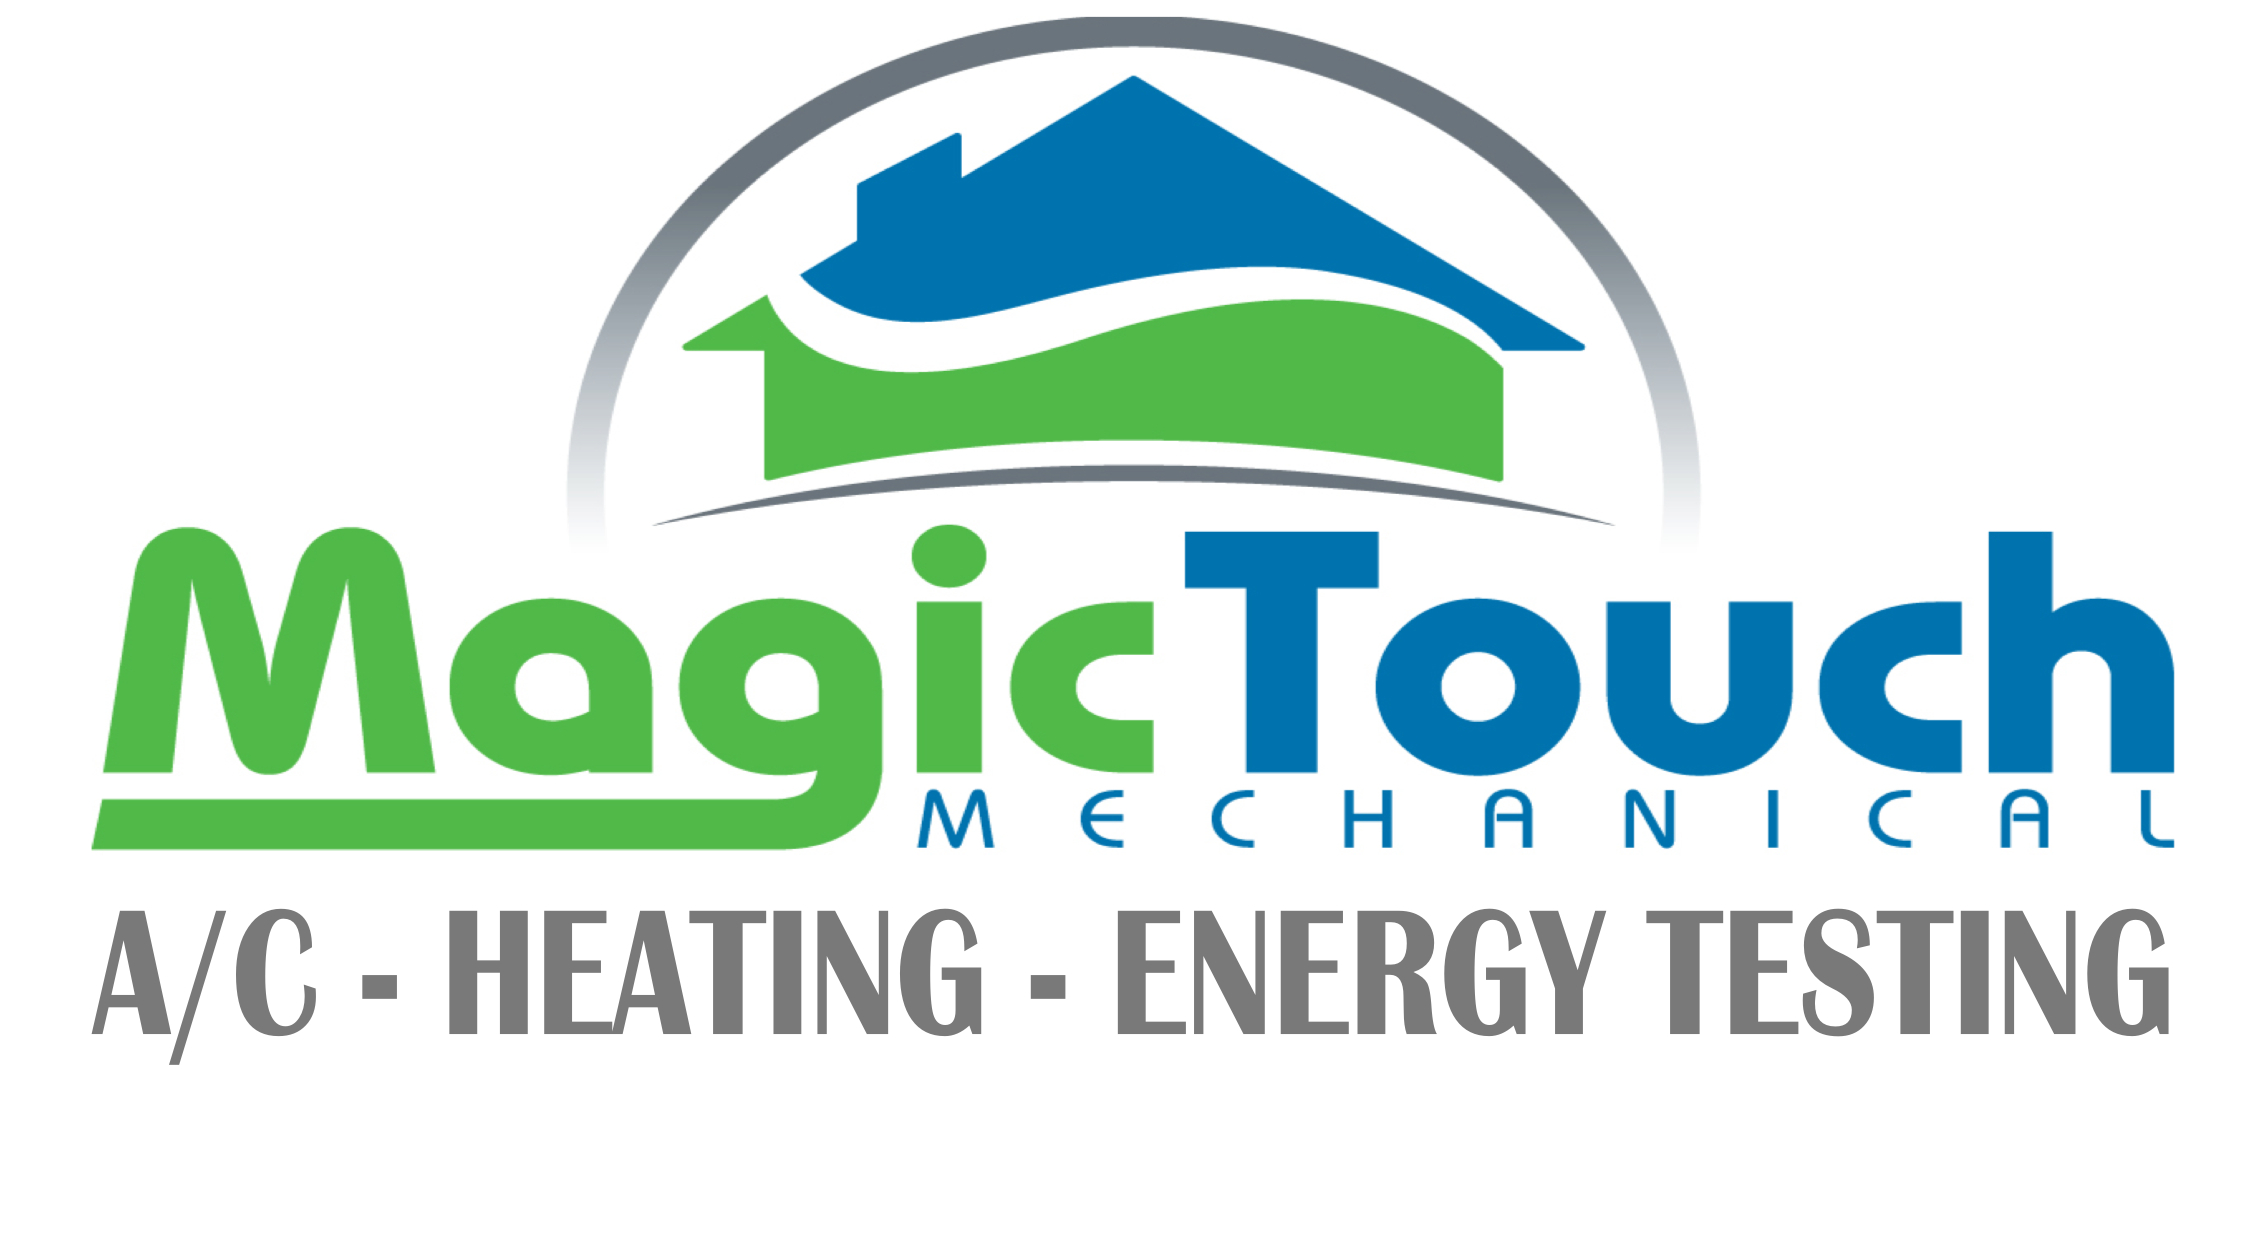 Magic Touch Mechanical A/C - Heating - Energy Testing